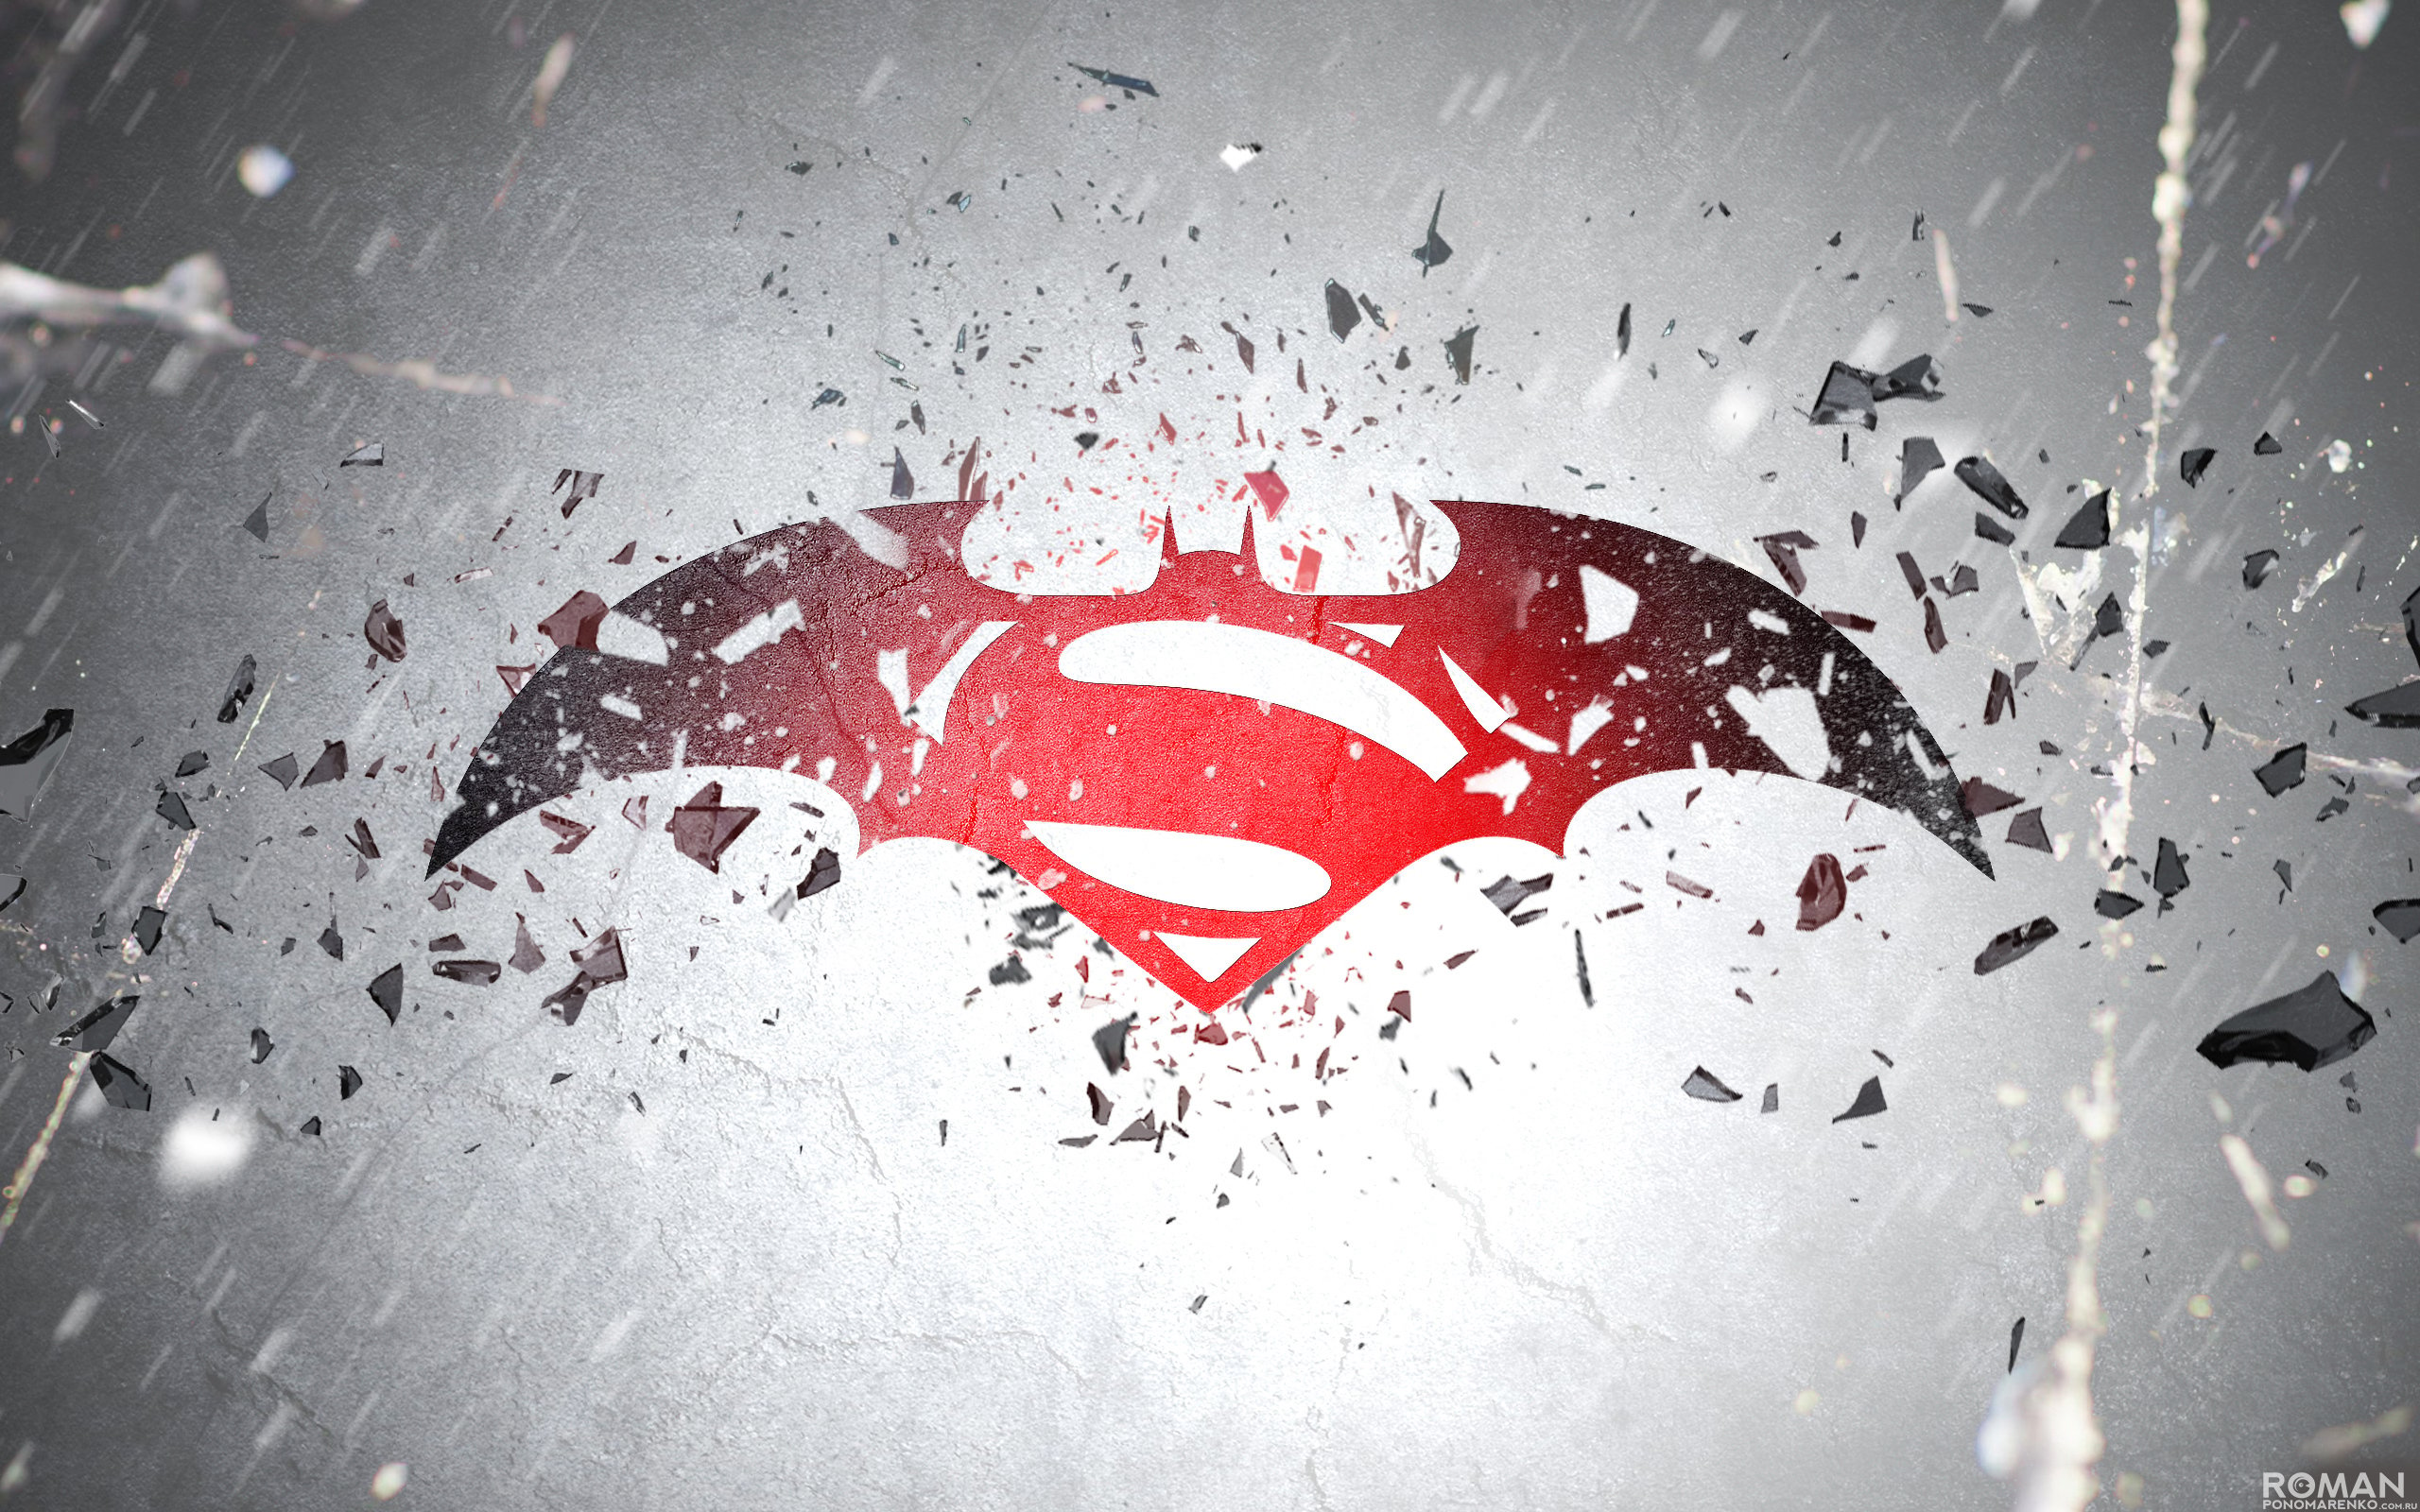 BATMAN VS SUPERMAN WALLPAPERS FREE Wallpapers Background images